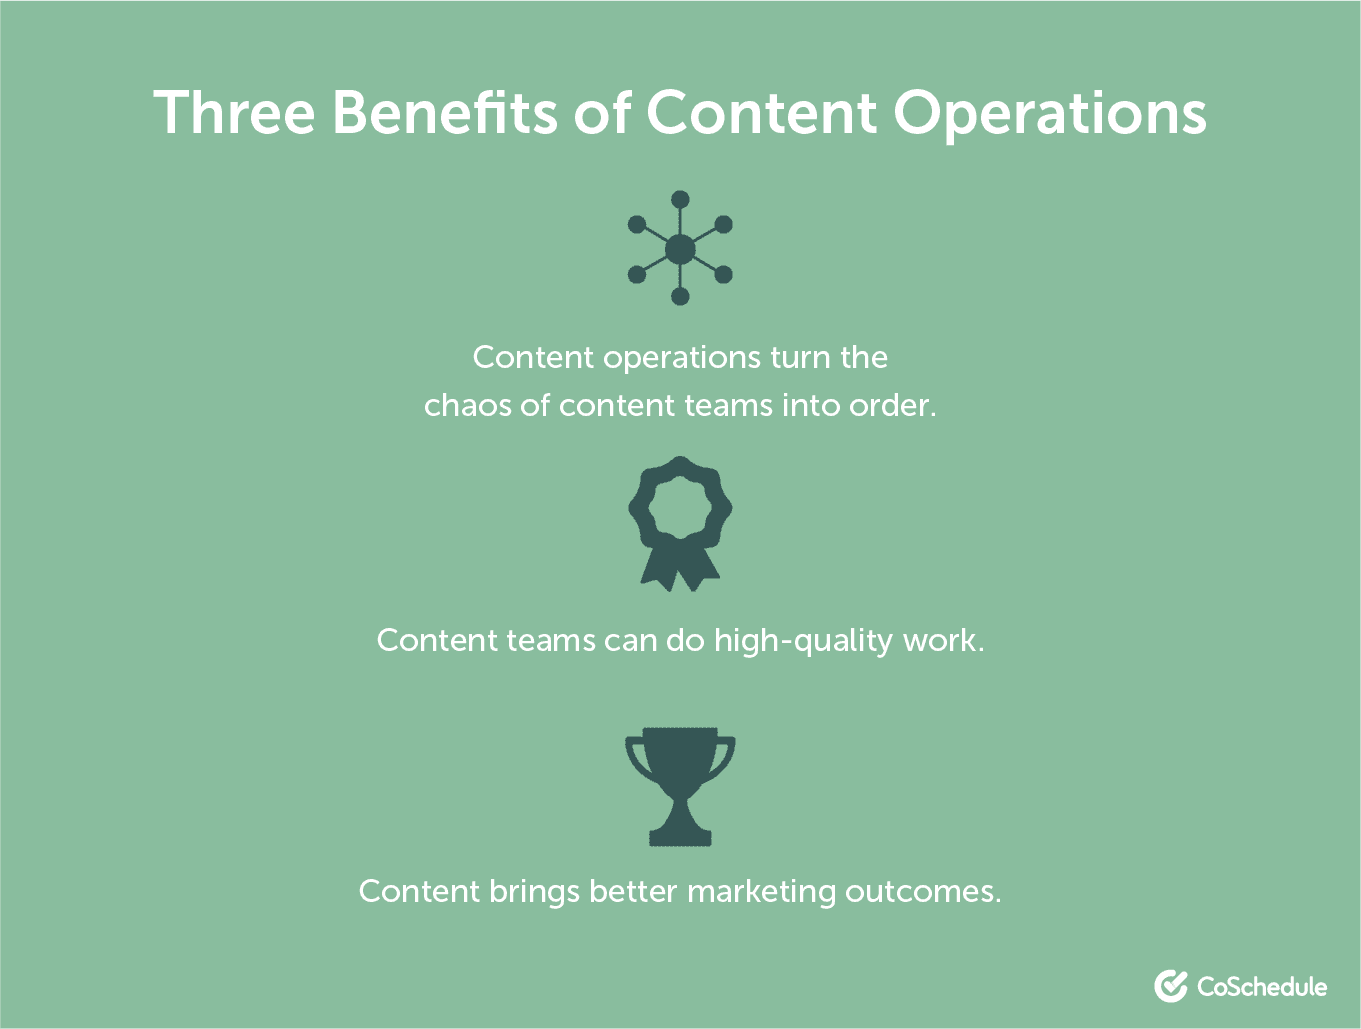 Three benefits to content operations